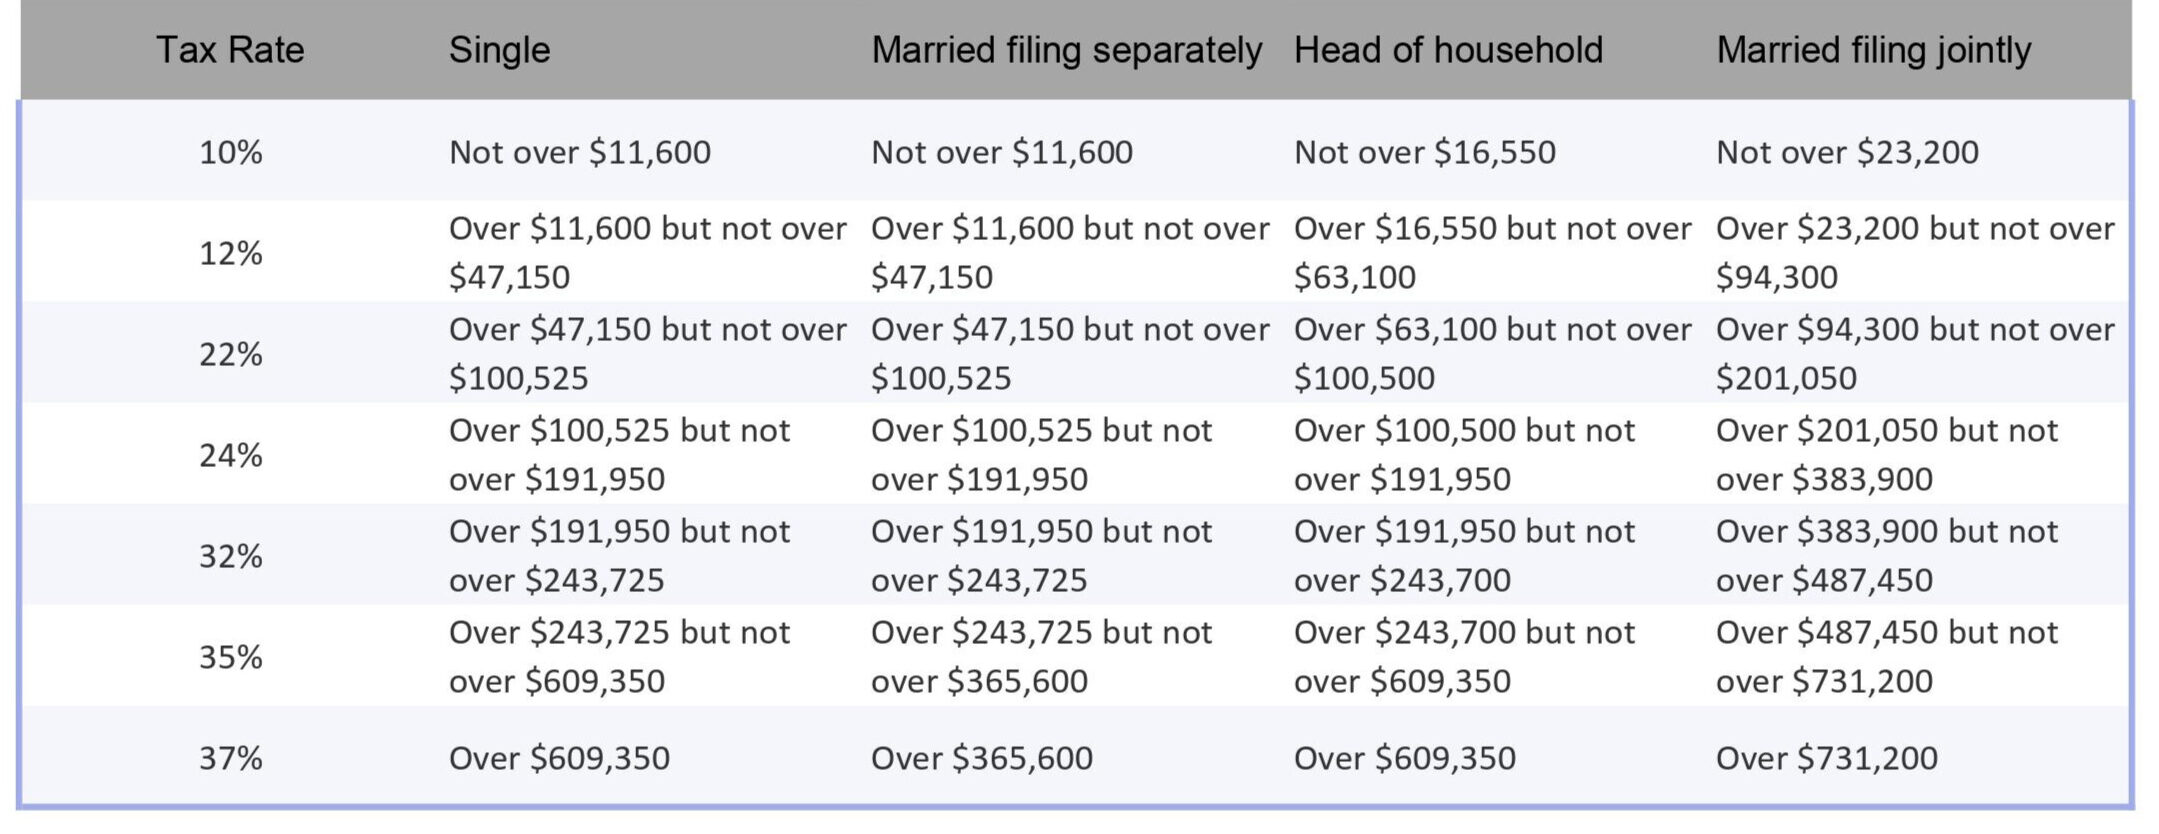 Spreadsheet showing the 2024 tax rates based on income for individuals filling as single, married filing separaely, head of household, and married filing jointly.